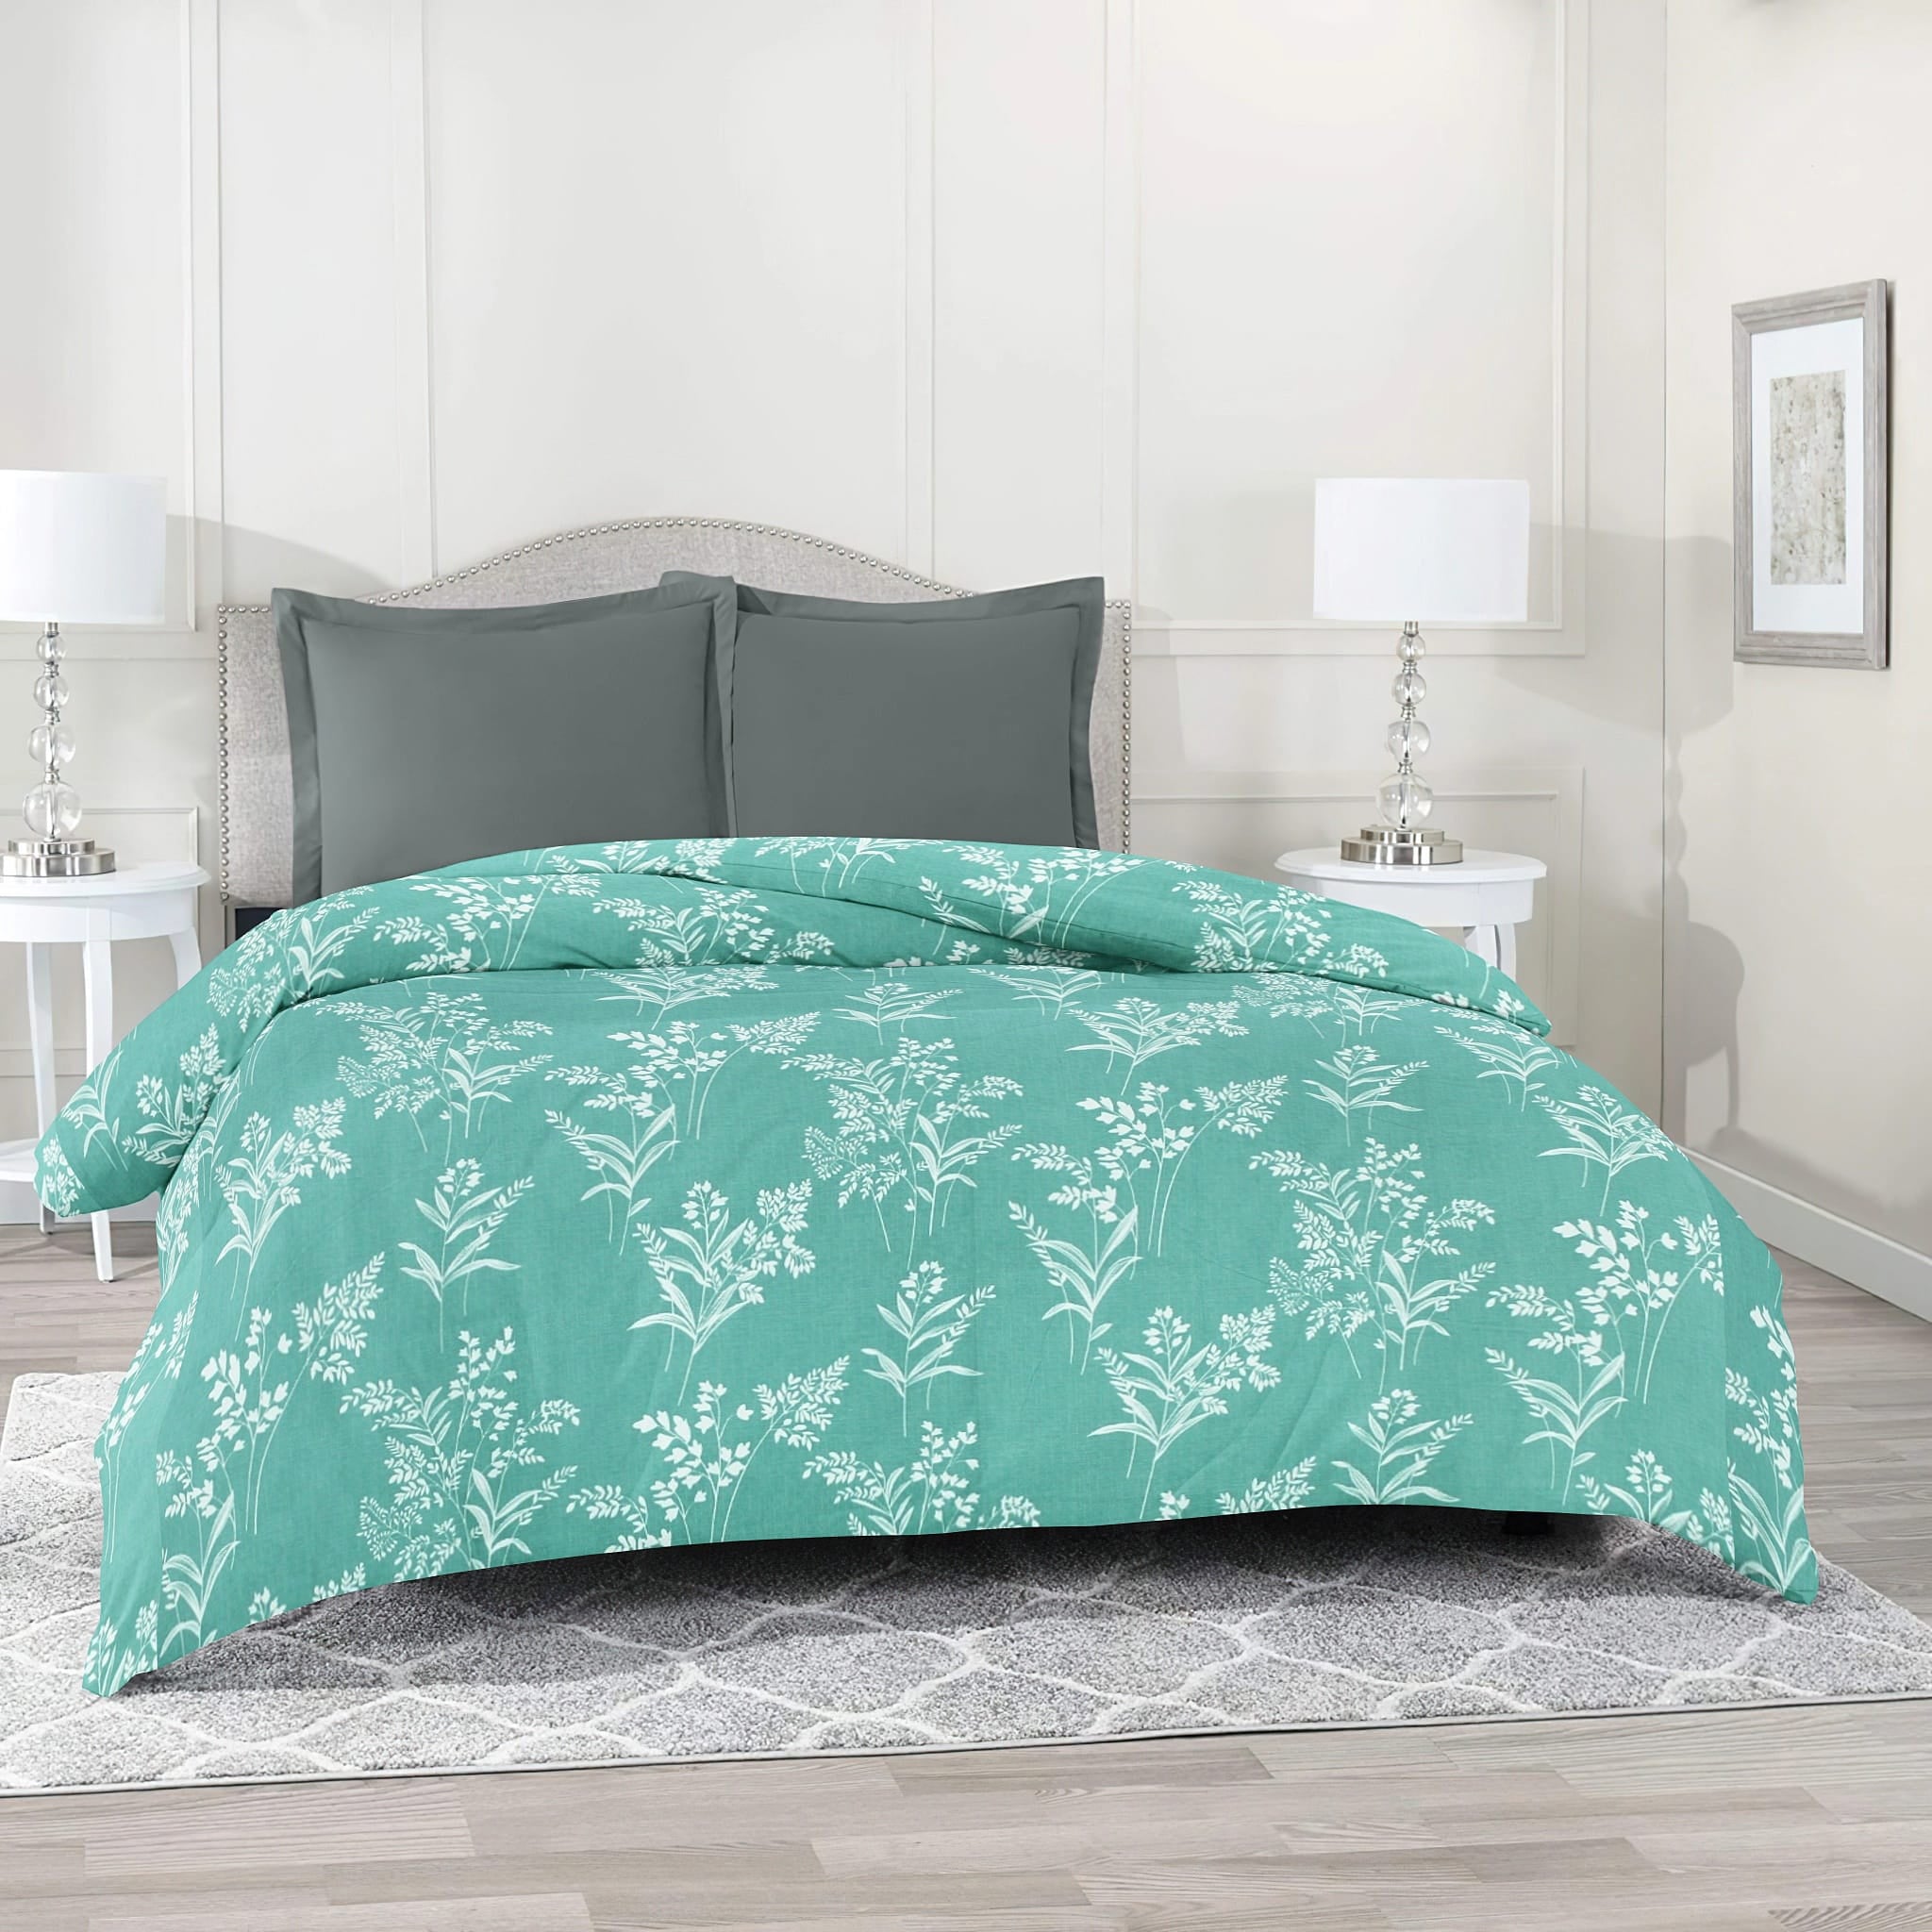 Printed Multicolor Floral Duvet Cover/Quilt Cover with Zipper